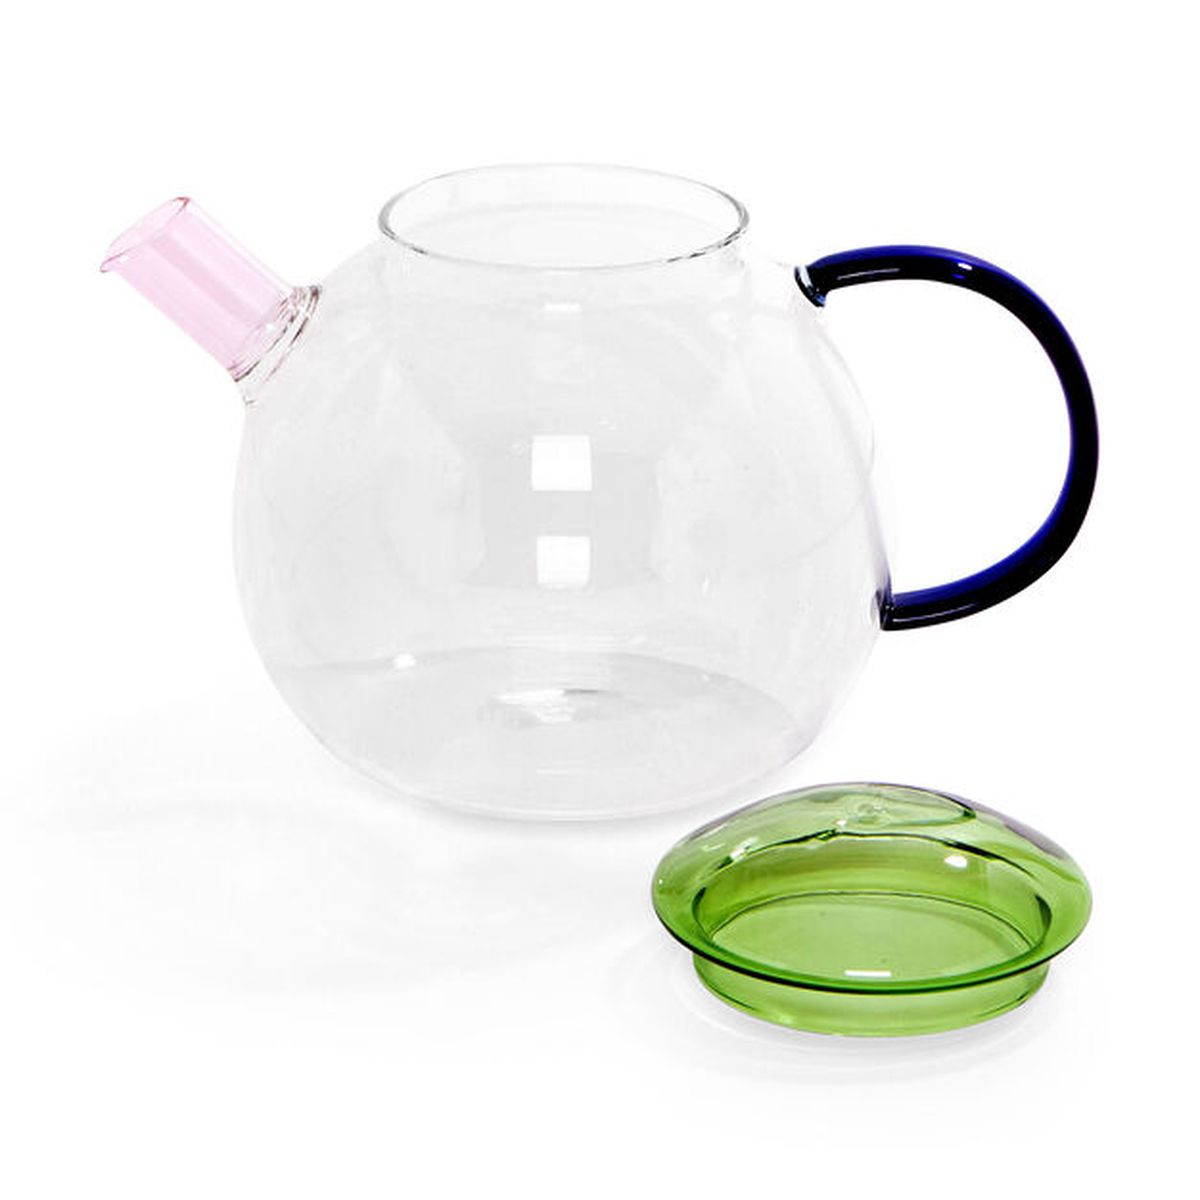 Rounded glass teapot with a green lid, blue handle, and pink spout.